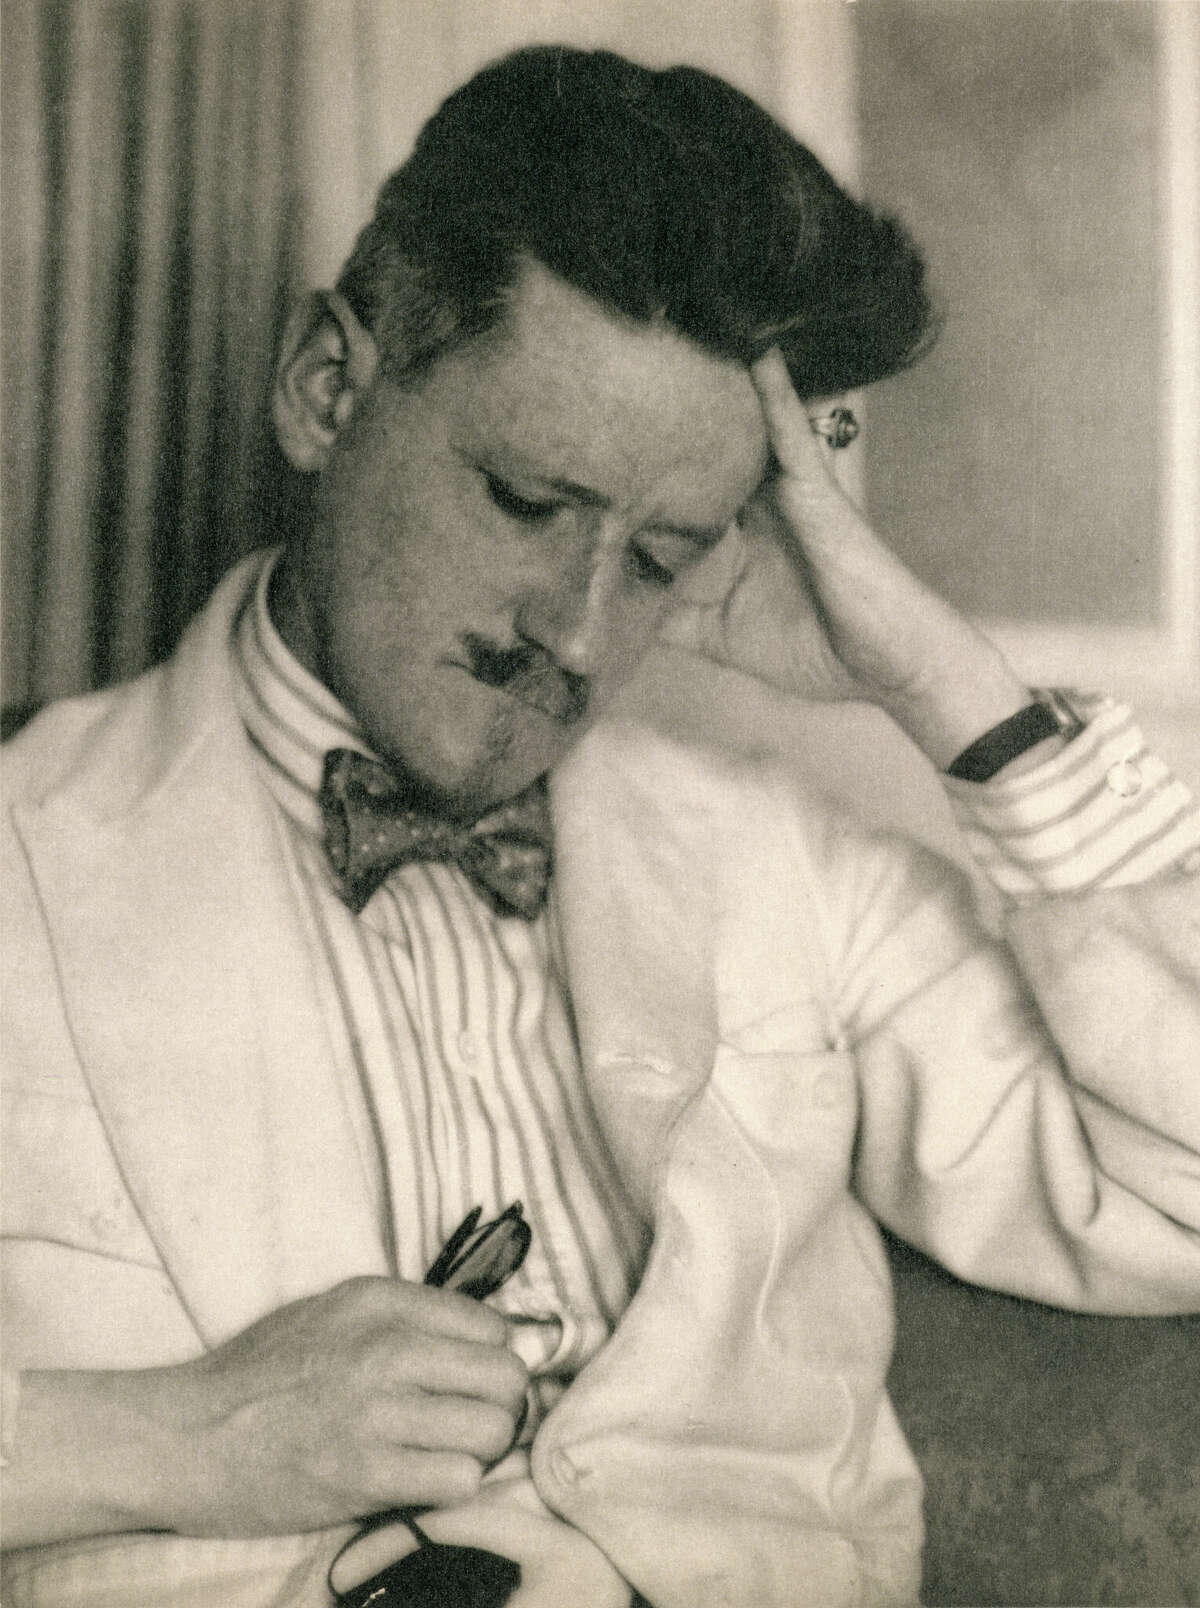 James Joyce is best known for his collection of short stories "Dubliners" (1914) and the novels "Portrait of the Artist as a Young Man" (1916), "Ulysses" (1922) and "Finnegan's Wake" (1939). Although Joyce lived most of his life as an expatriate, his work is largely centered on Dublin life and he is regarded as one of the icons of Irish culture.